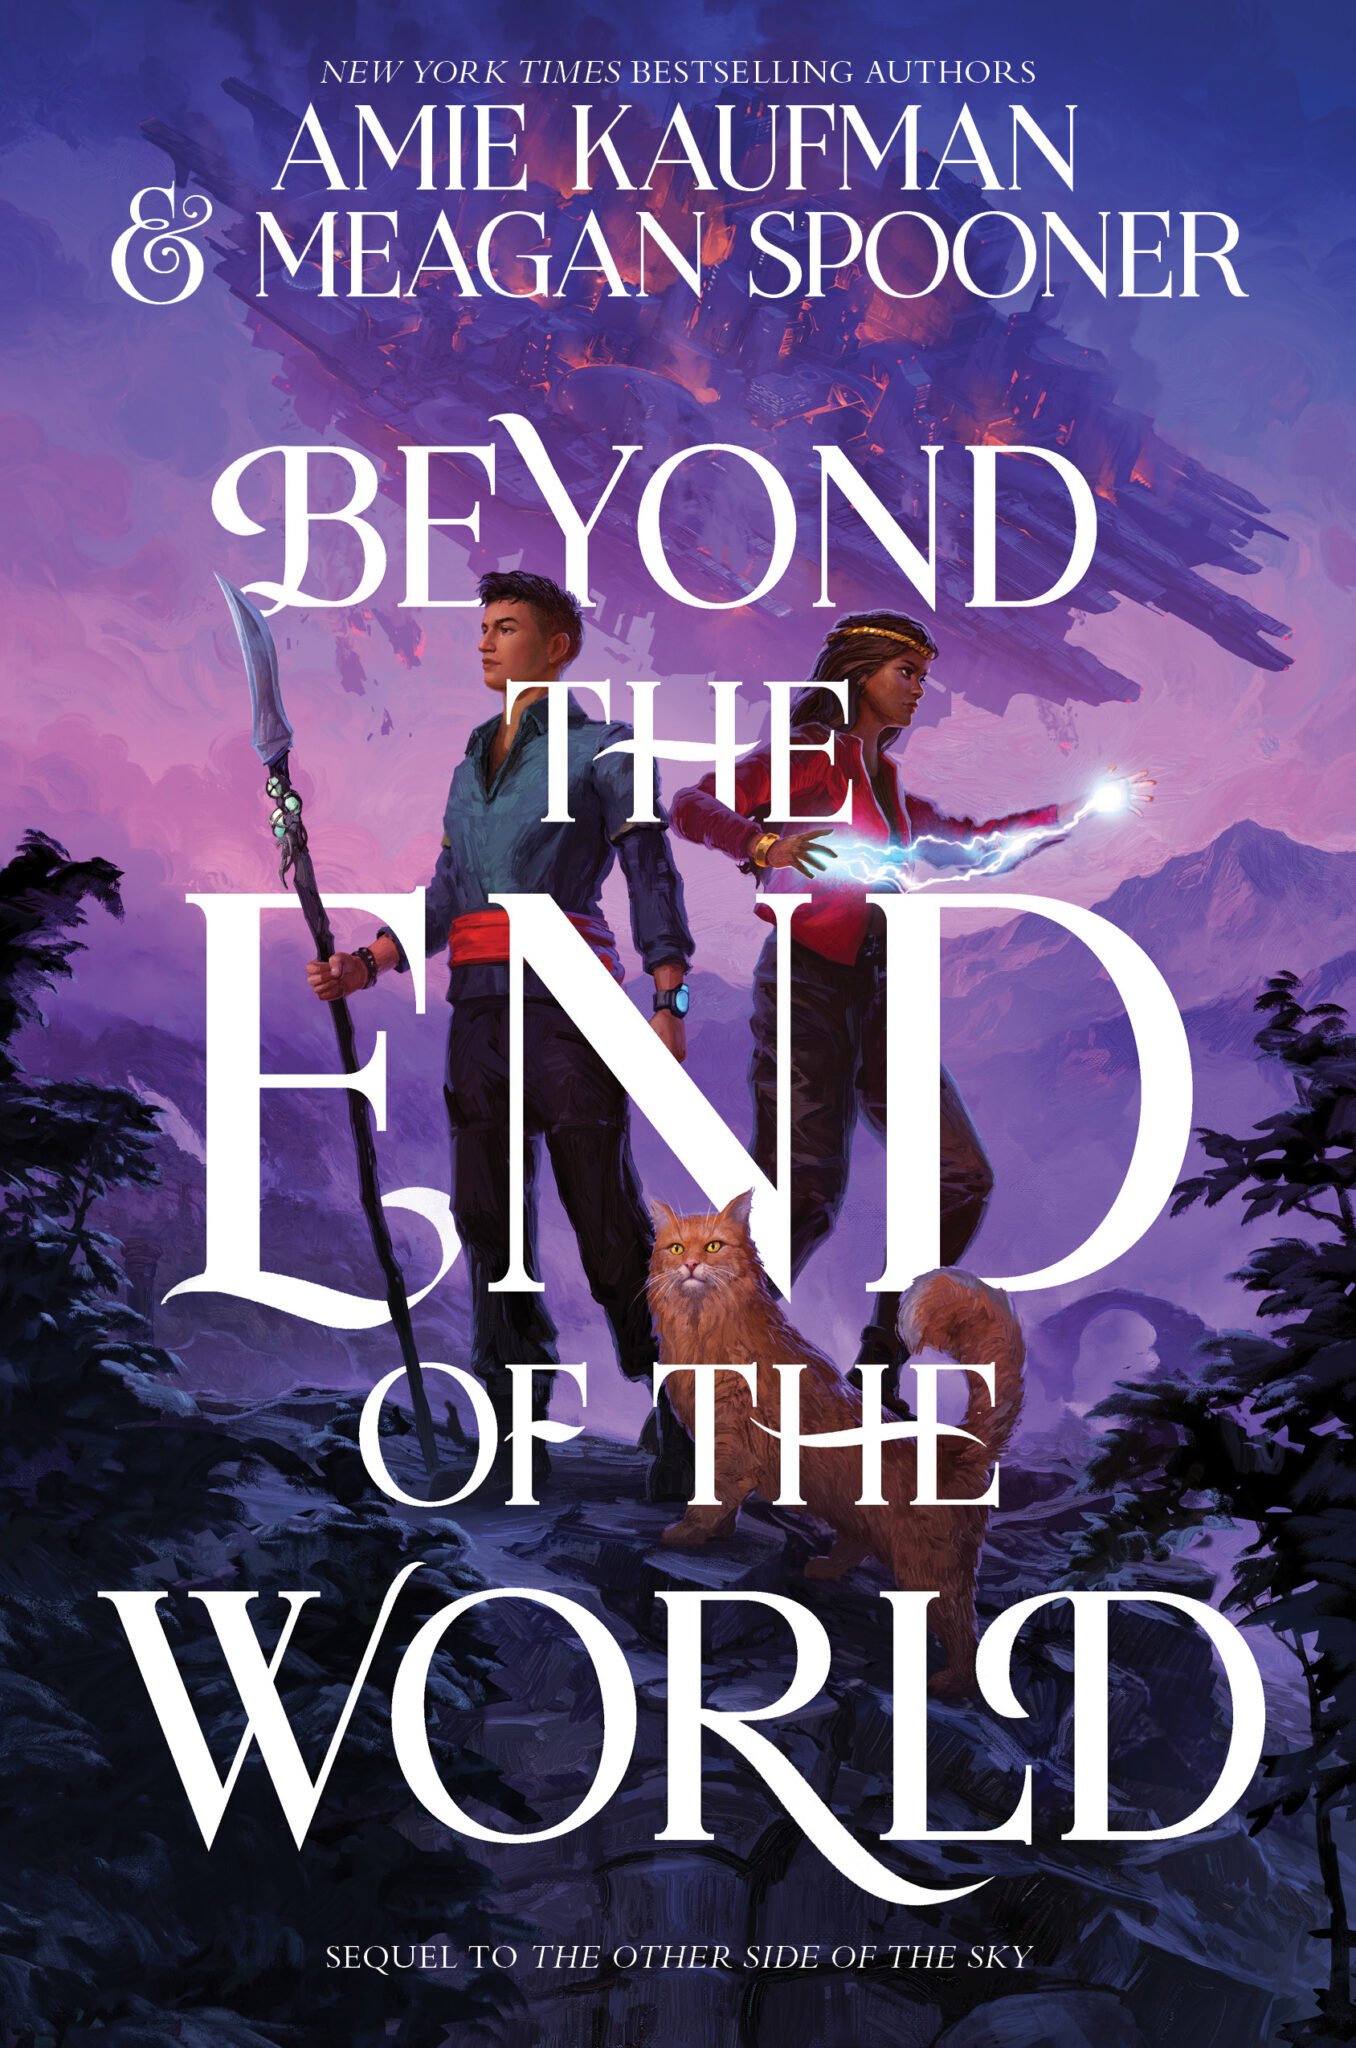 1. Jan 18 22 Beyond The End of the World.jpg